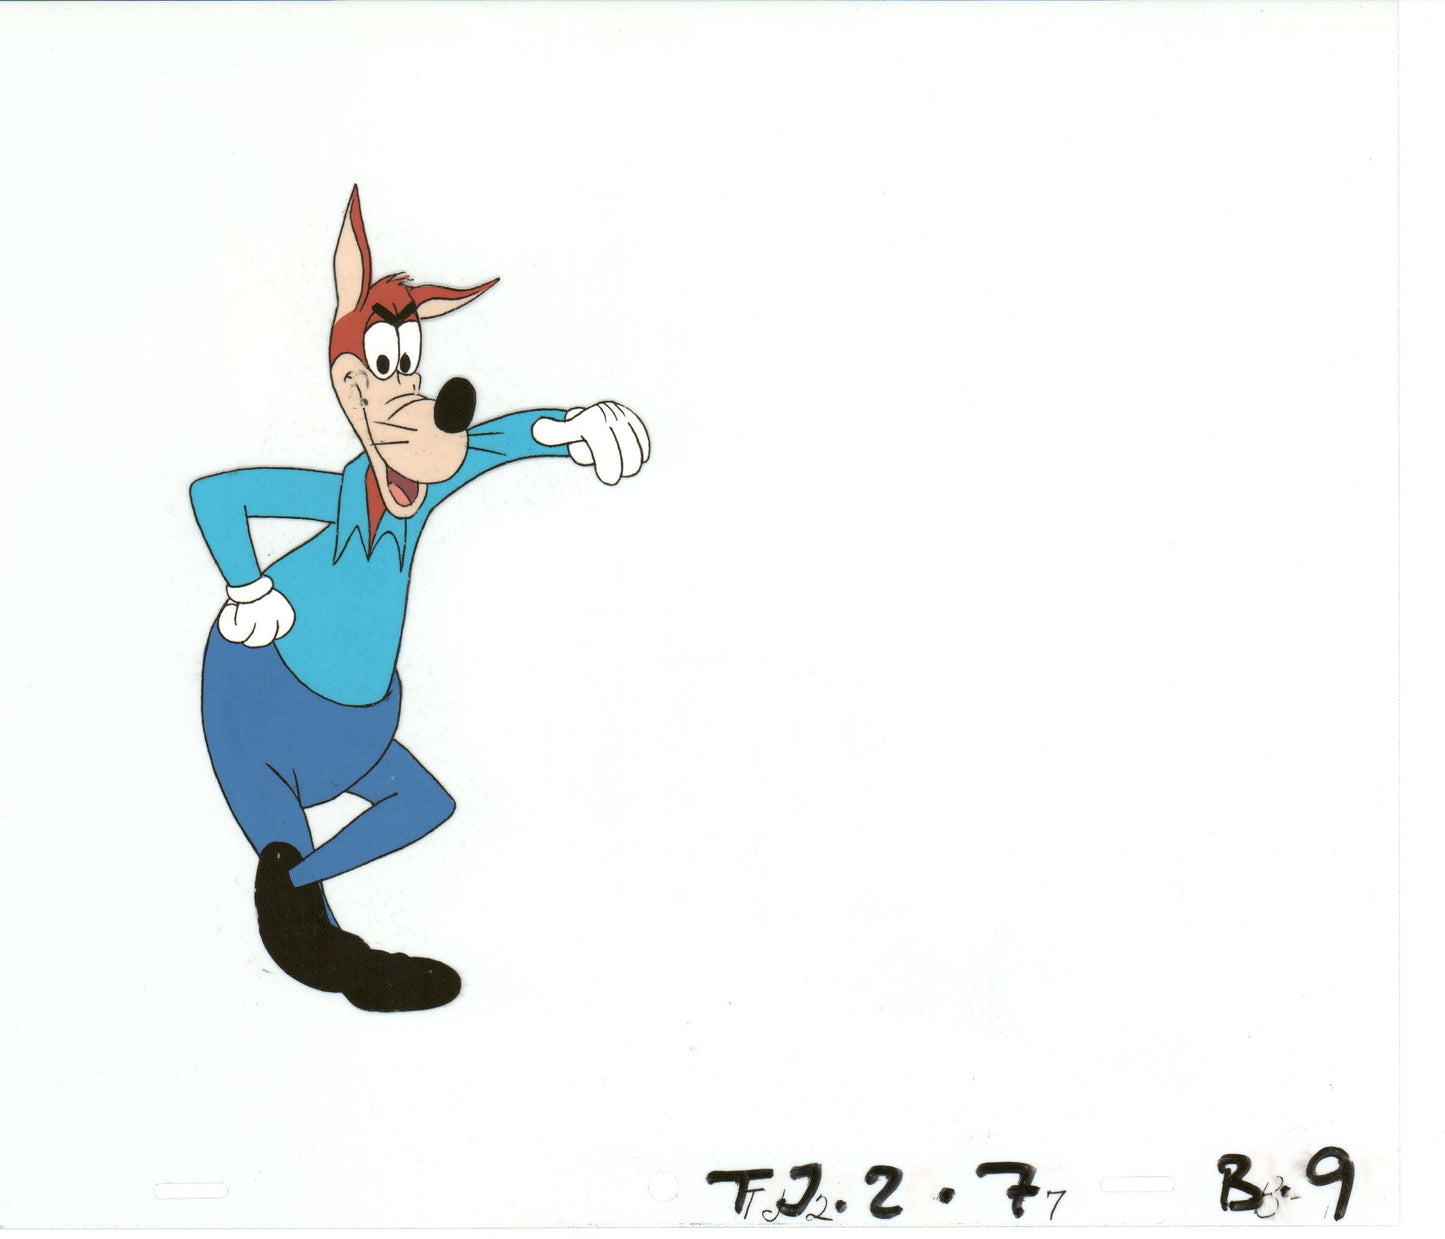 Tom & Jerry Original Production Animation Cel from Filmation 1980-82 b4370